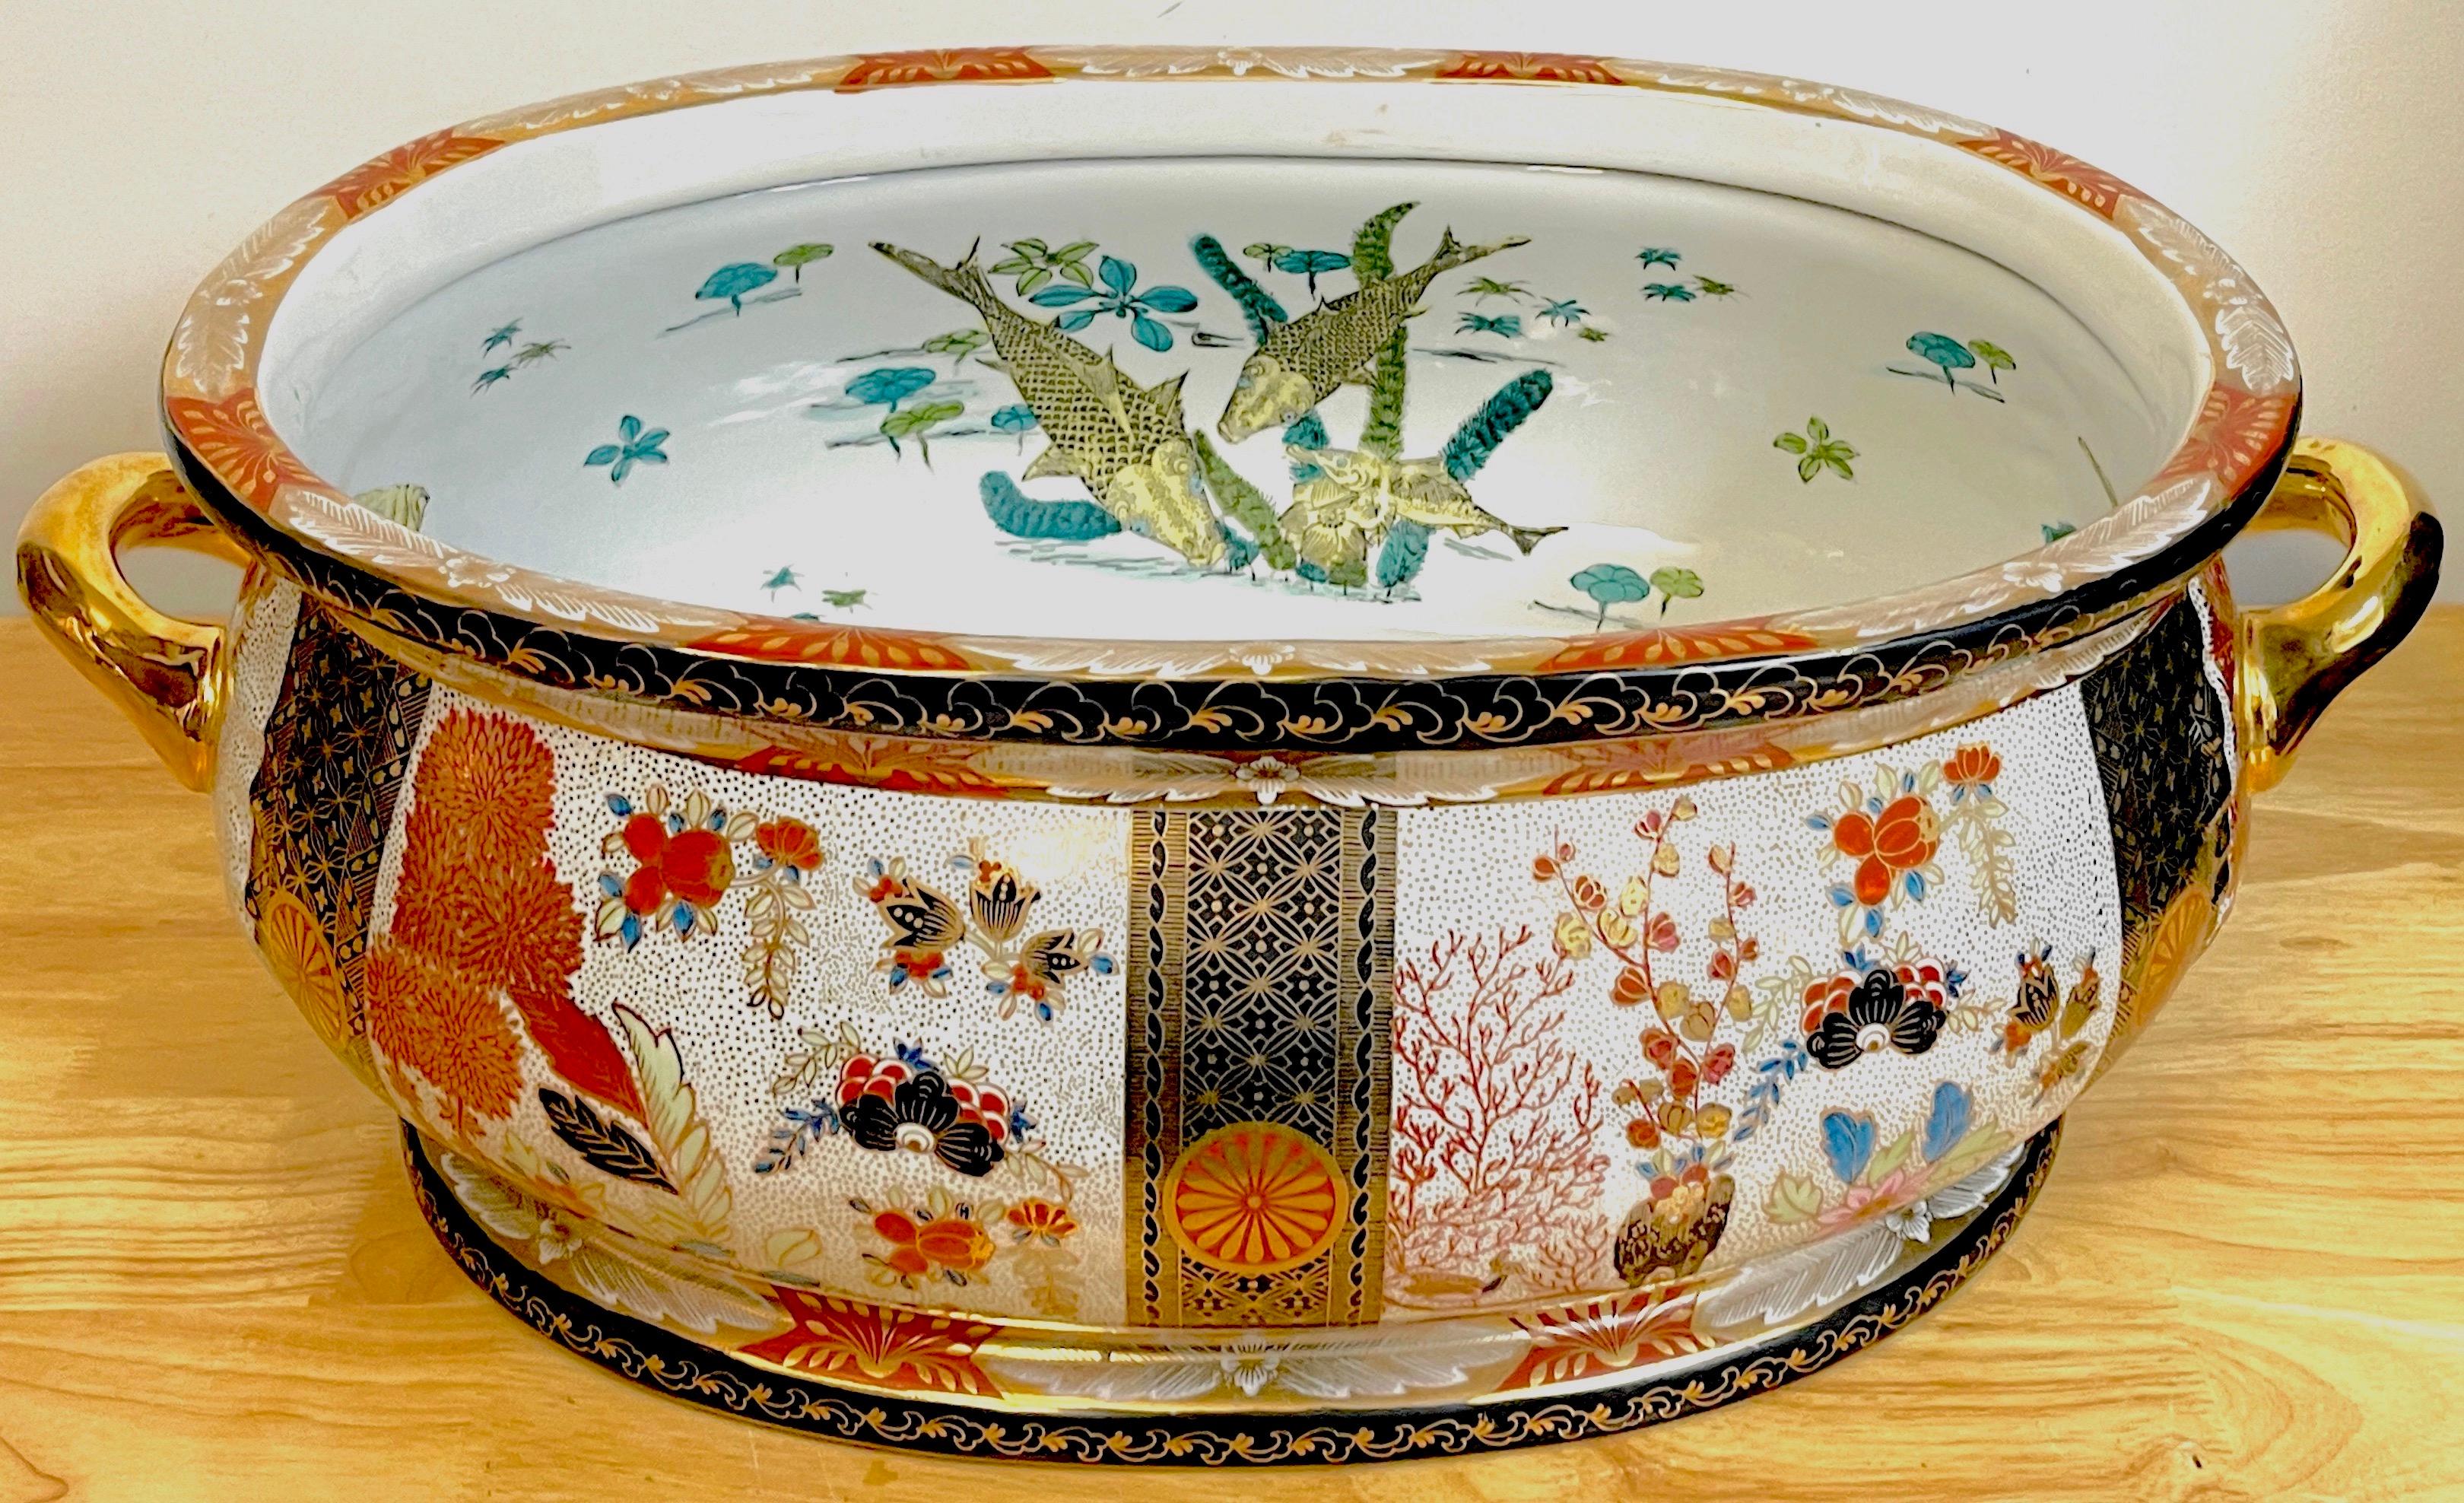 Large Royal Crown Derby style 'Imari' pattern centerpiece, profusely hand-painted decorated with rich, vibrant colors and gilt, unusual seaweed and floral patterns. The interior with painted with fish motifs. With twin gilt handles. Unmarked.
The